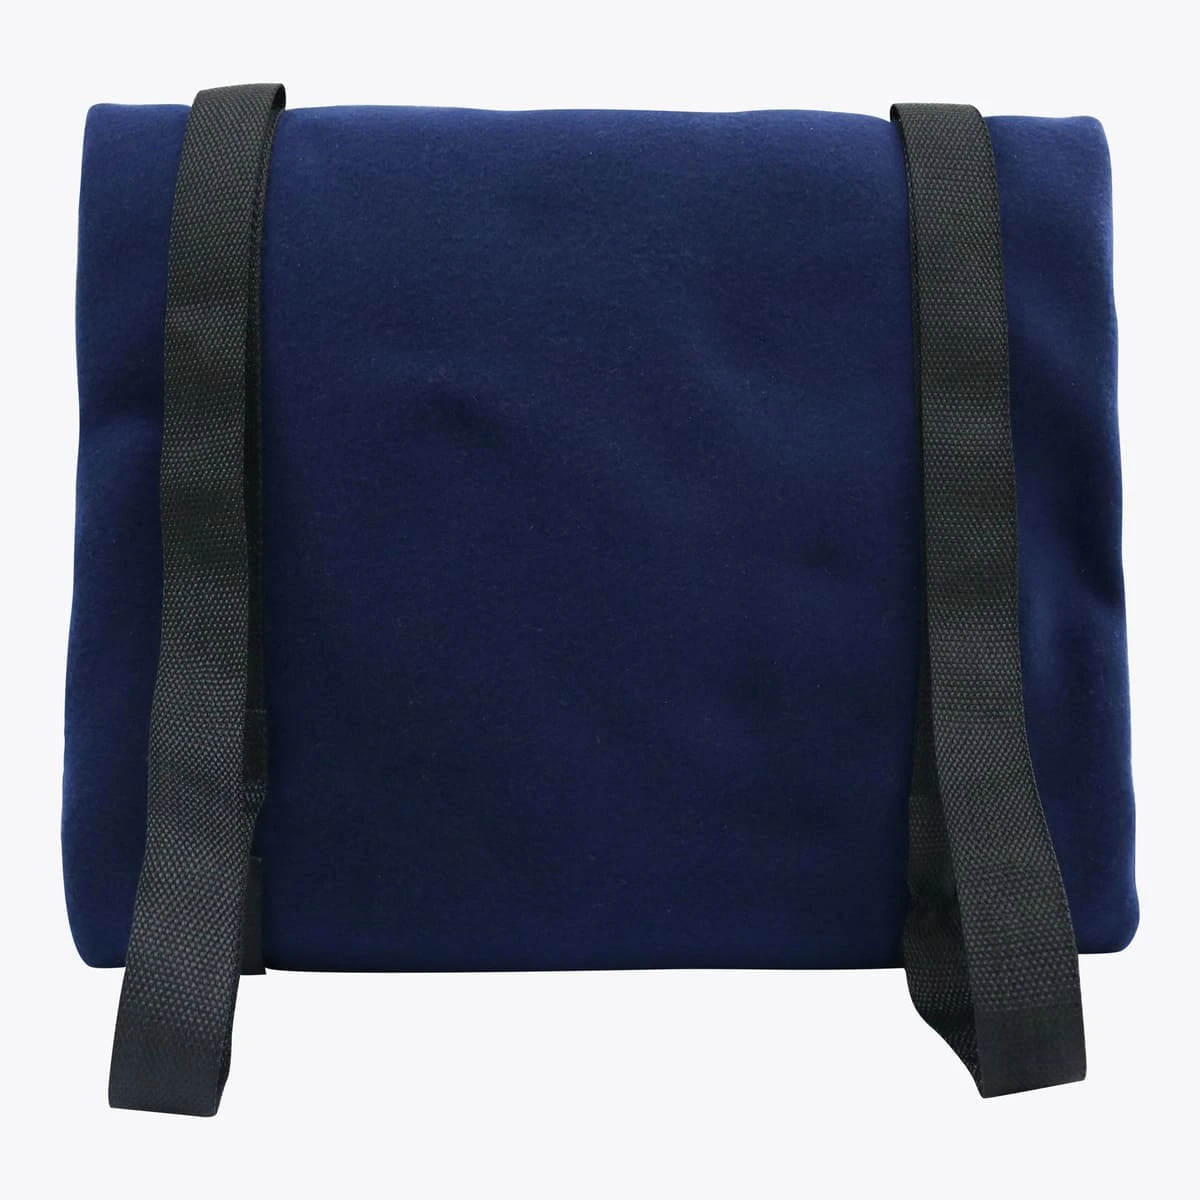 Embroidery Fleece Outdoor Blanket Backpack with Pillow (Navy)